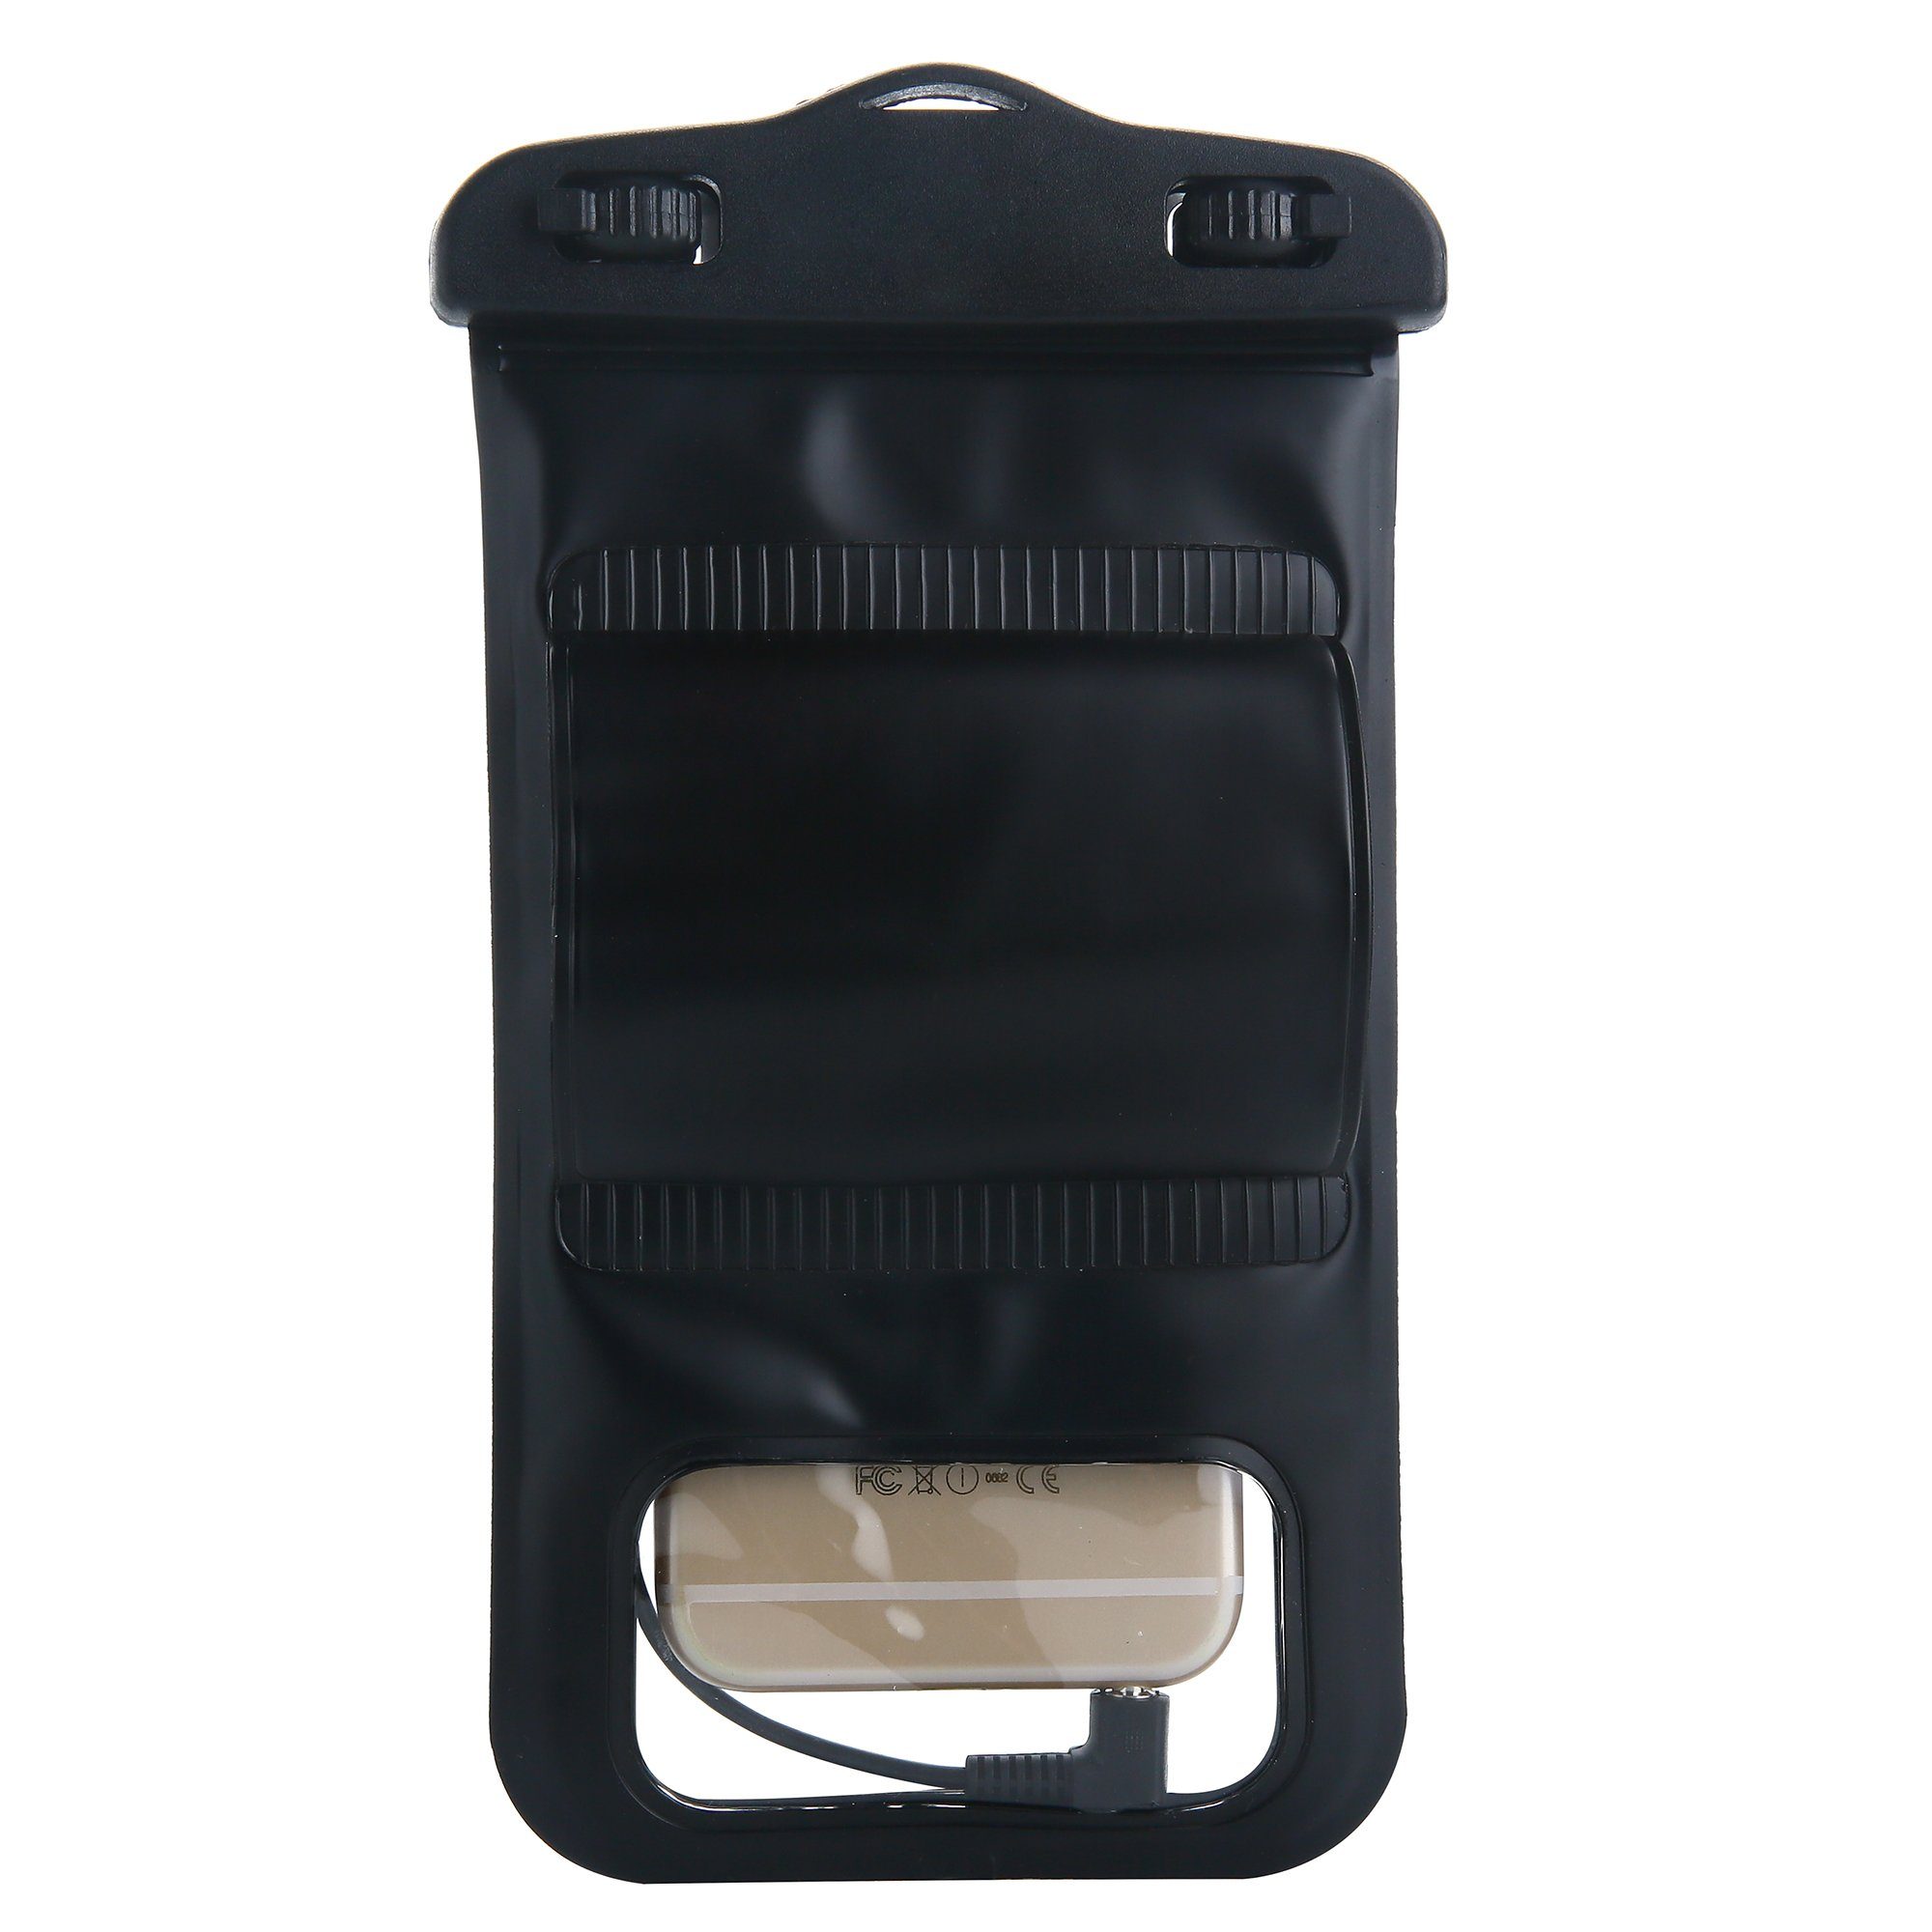 swimcell armband case with armband